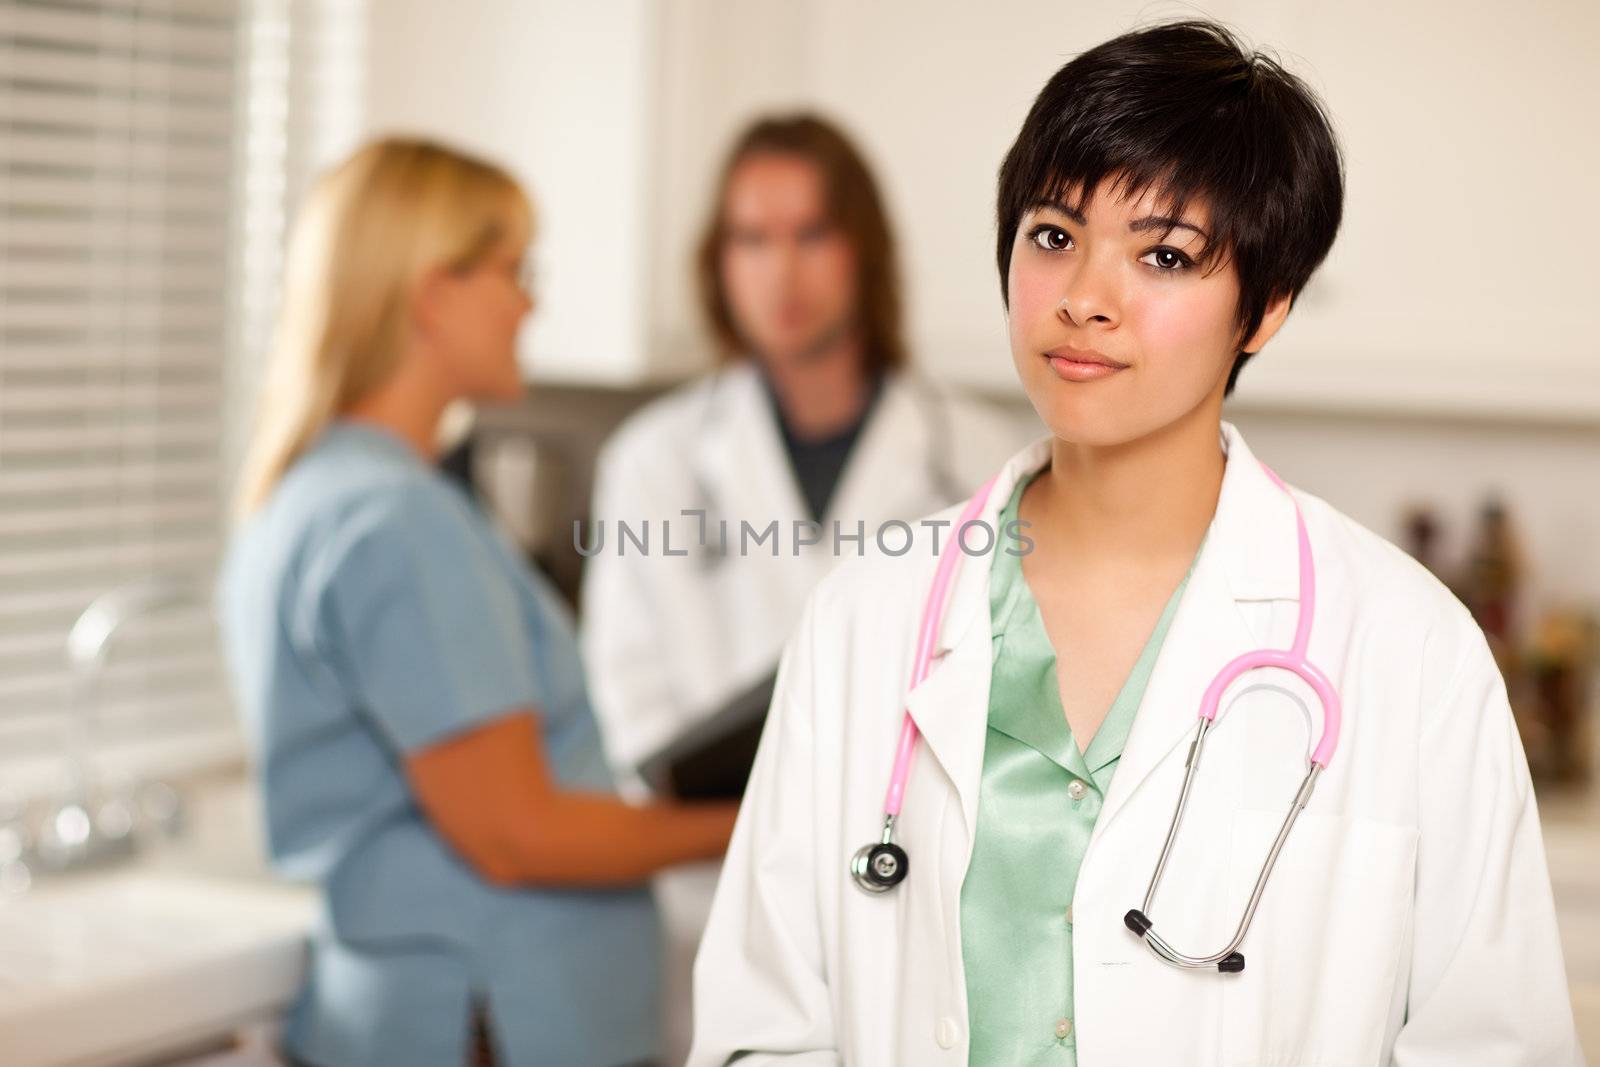 Pretty Latino Doctor Smiles at the Camera as Colleagues Talk Behind Her.